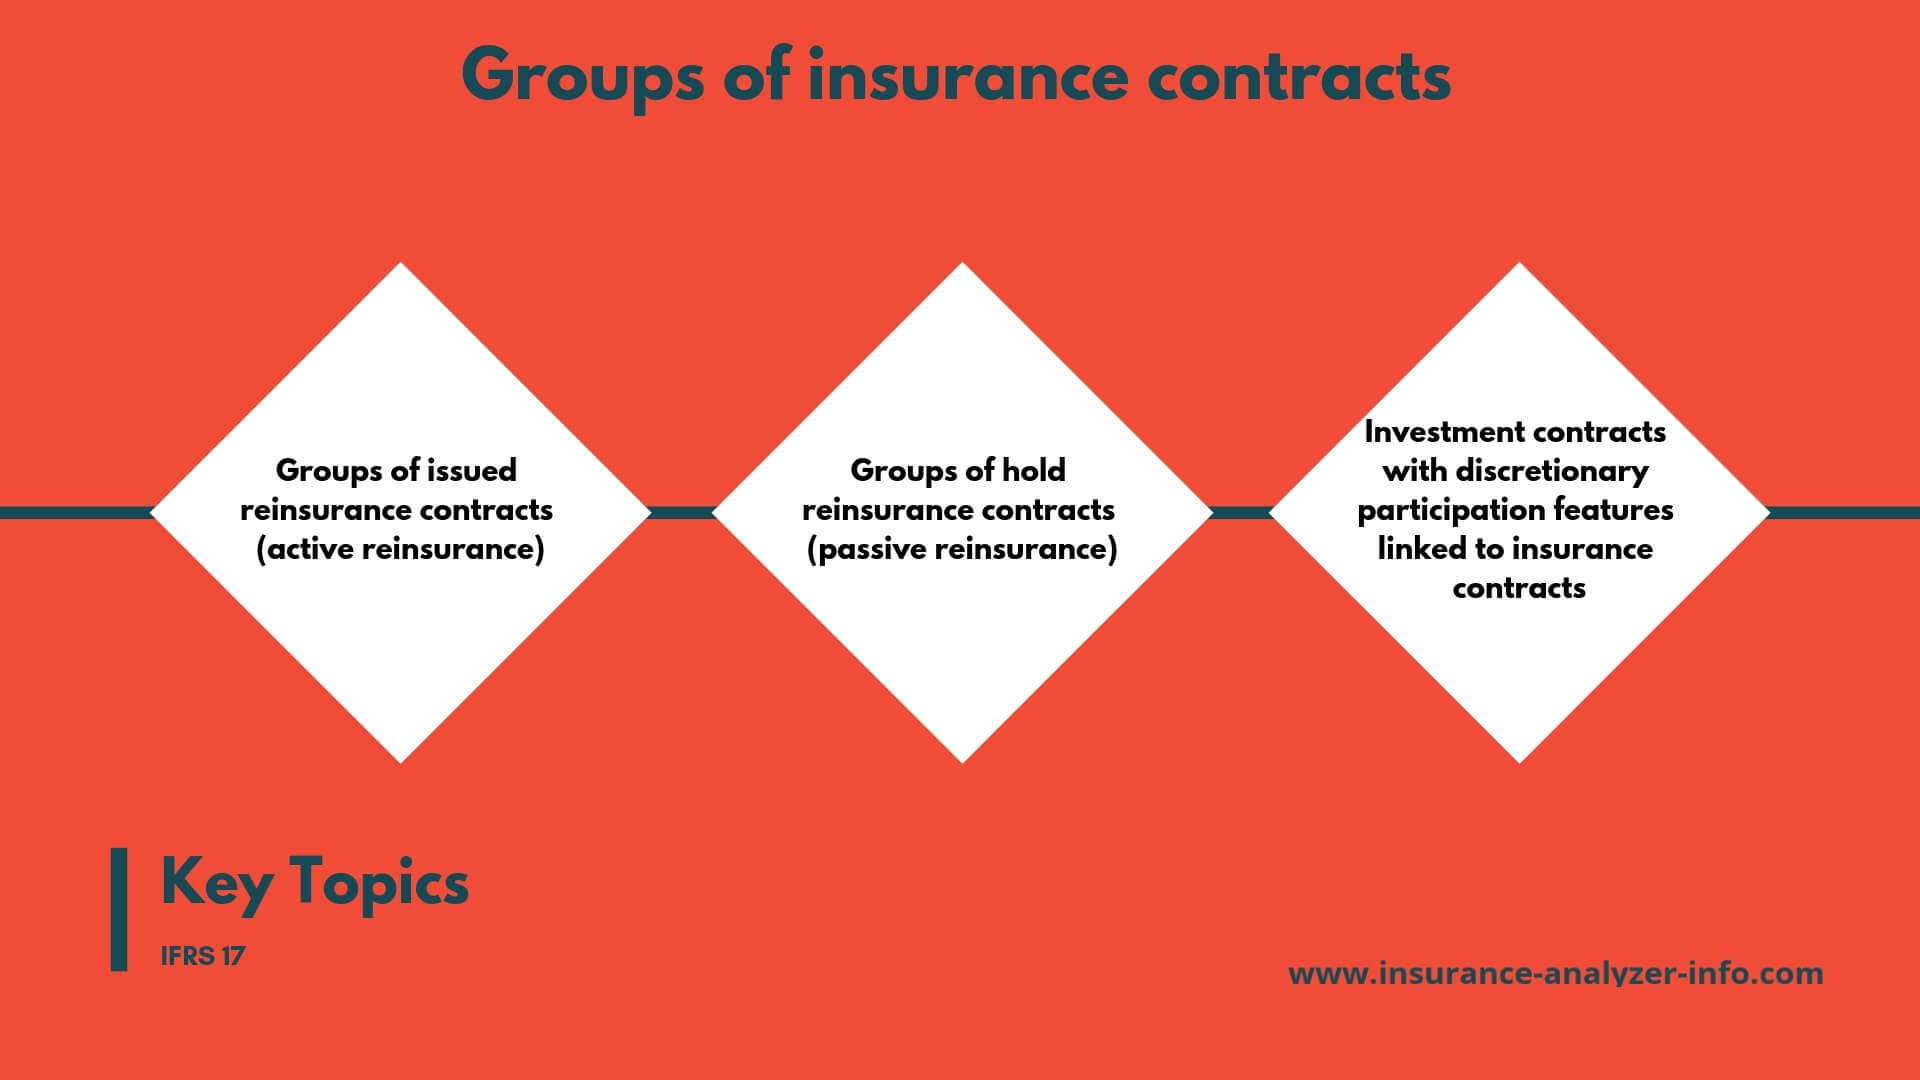 Key topics of IFRS 17 for groups of insurance contracts - Insurance